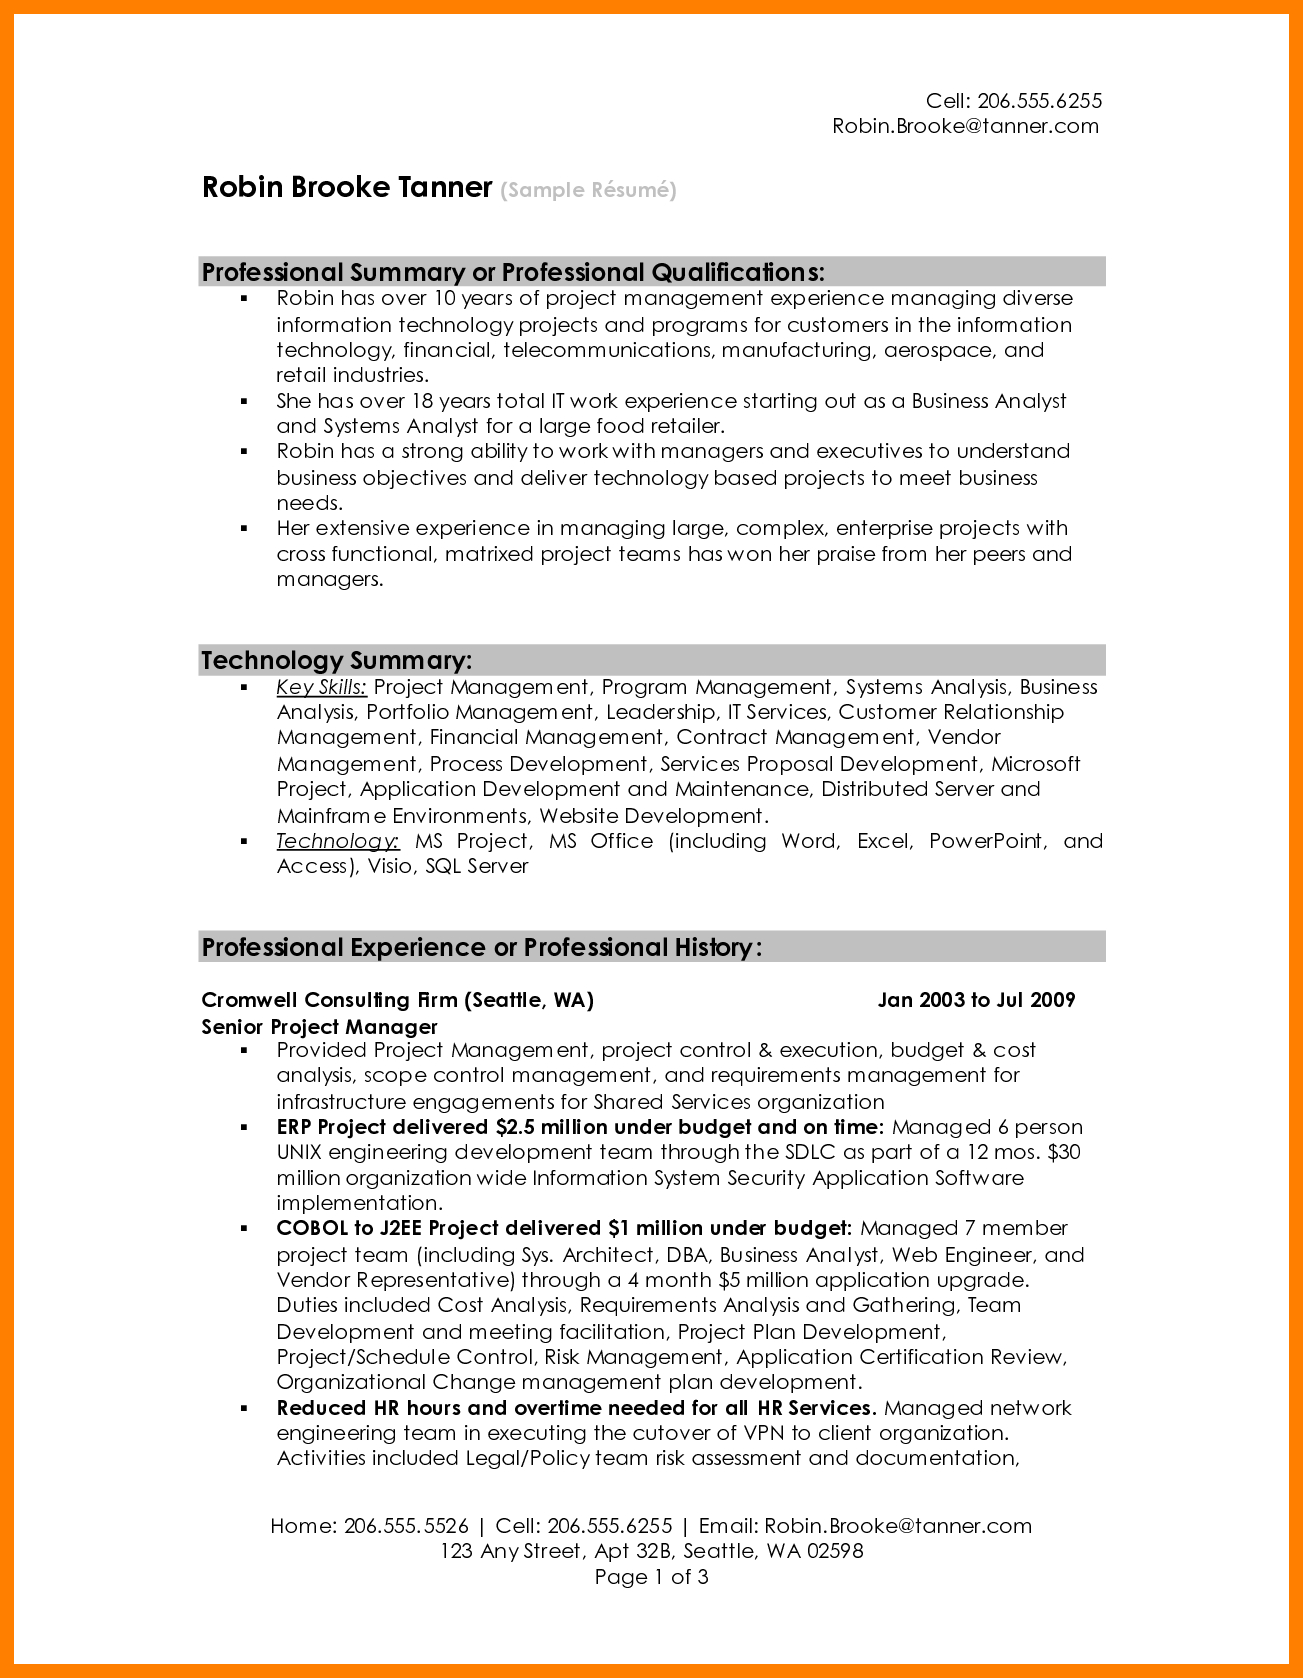 Resume Summary Examples 8 Resume Summary Examples For Retail Letter Signature